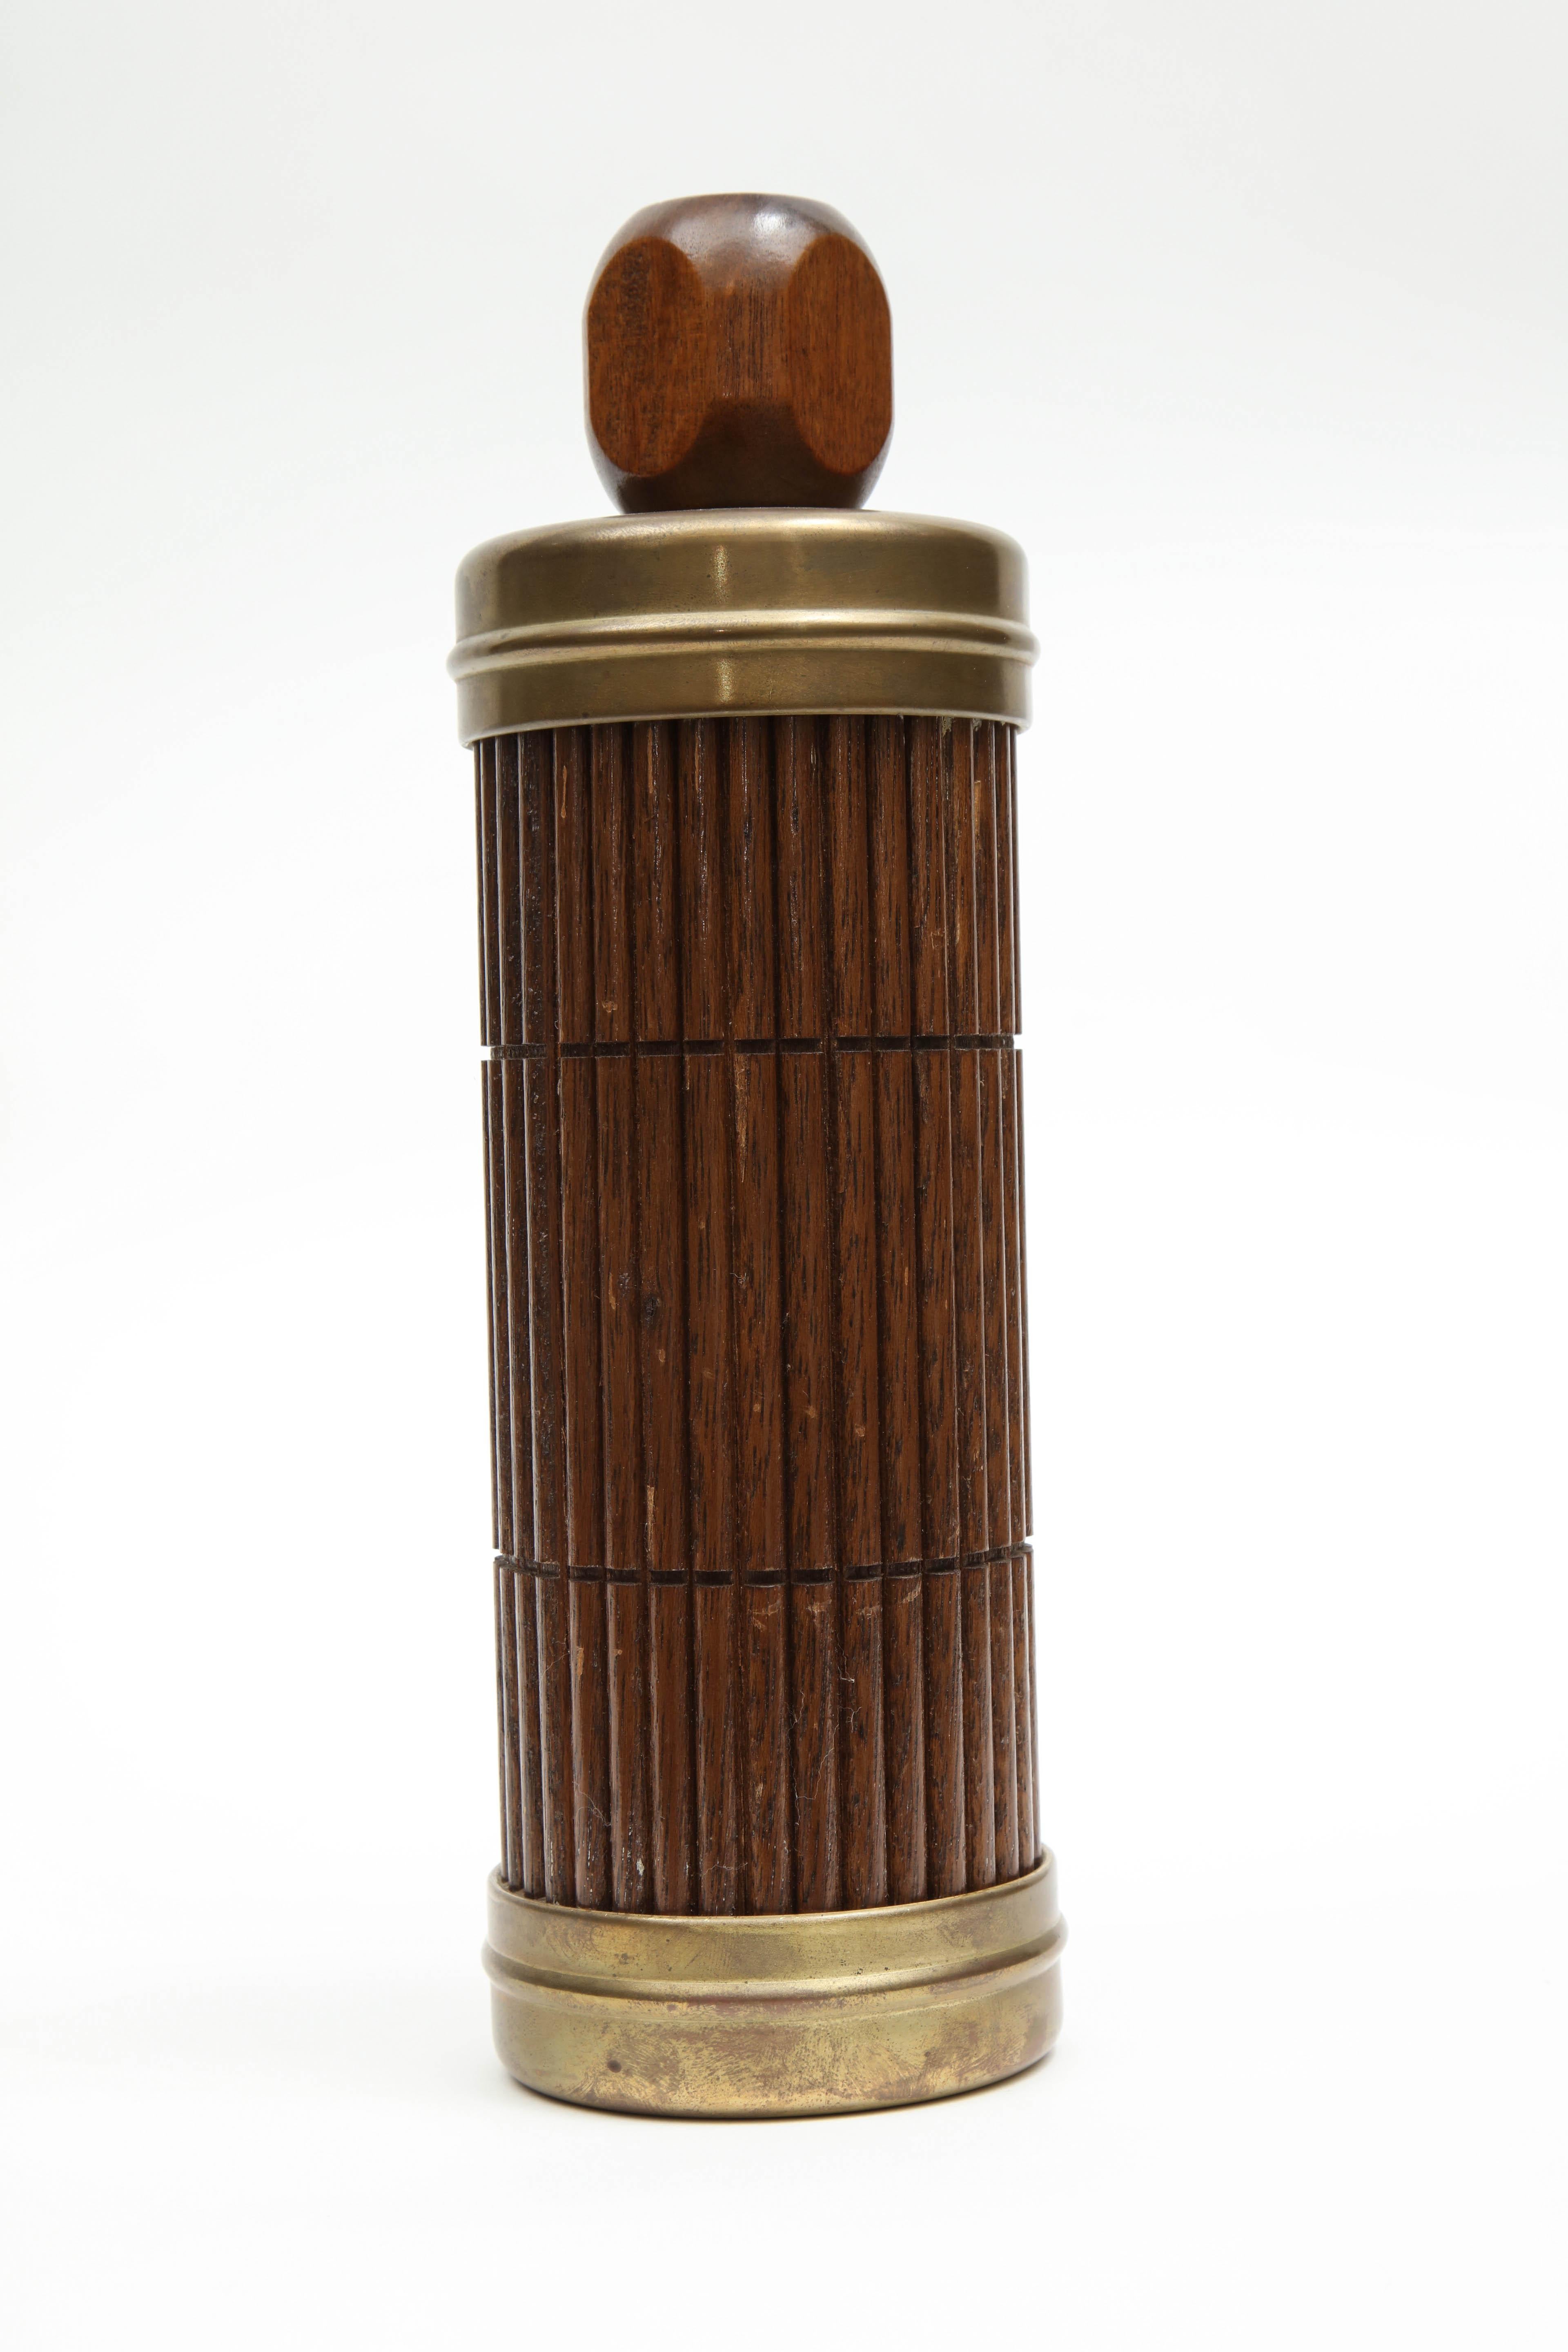 A thermo from circa 1950, Japan. Made of bamboo and brass details. midcentury design.